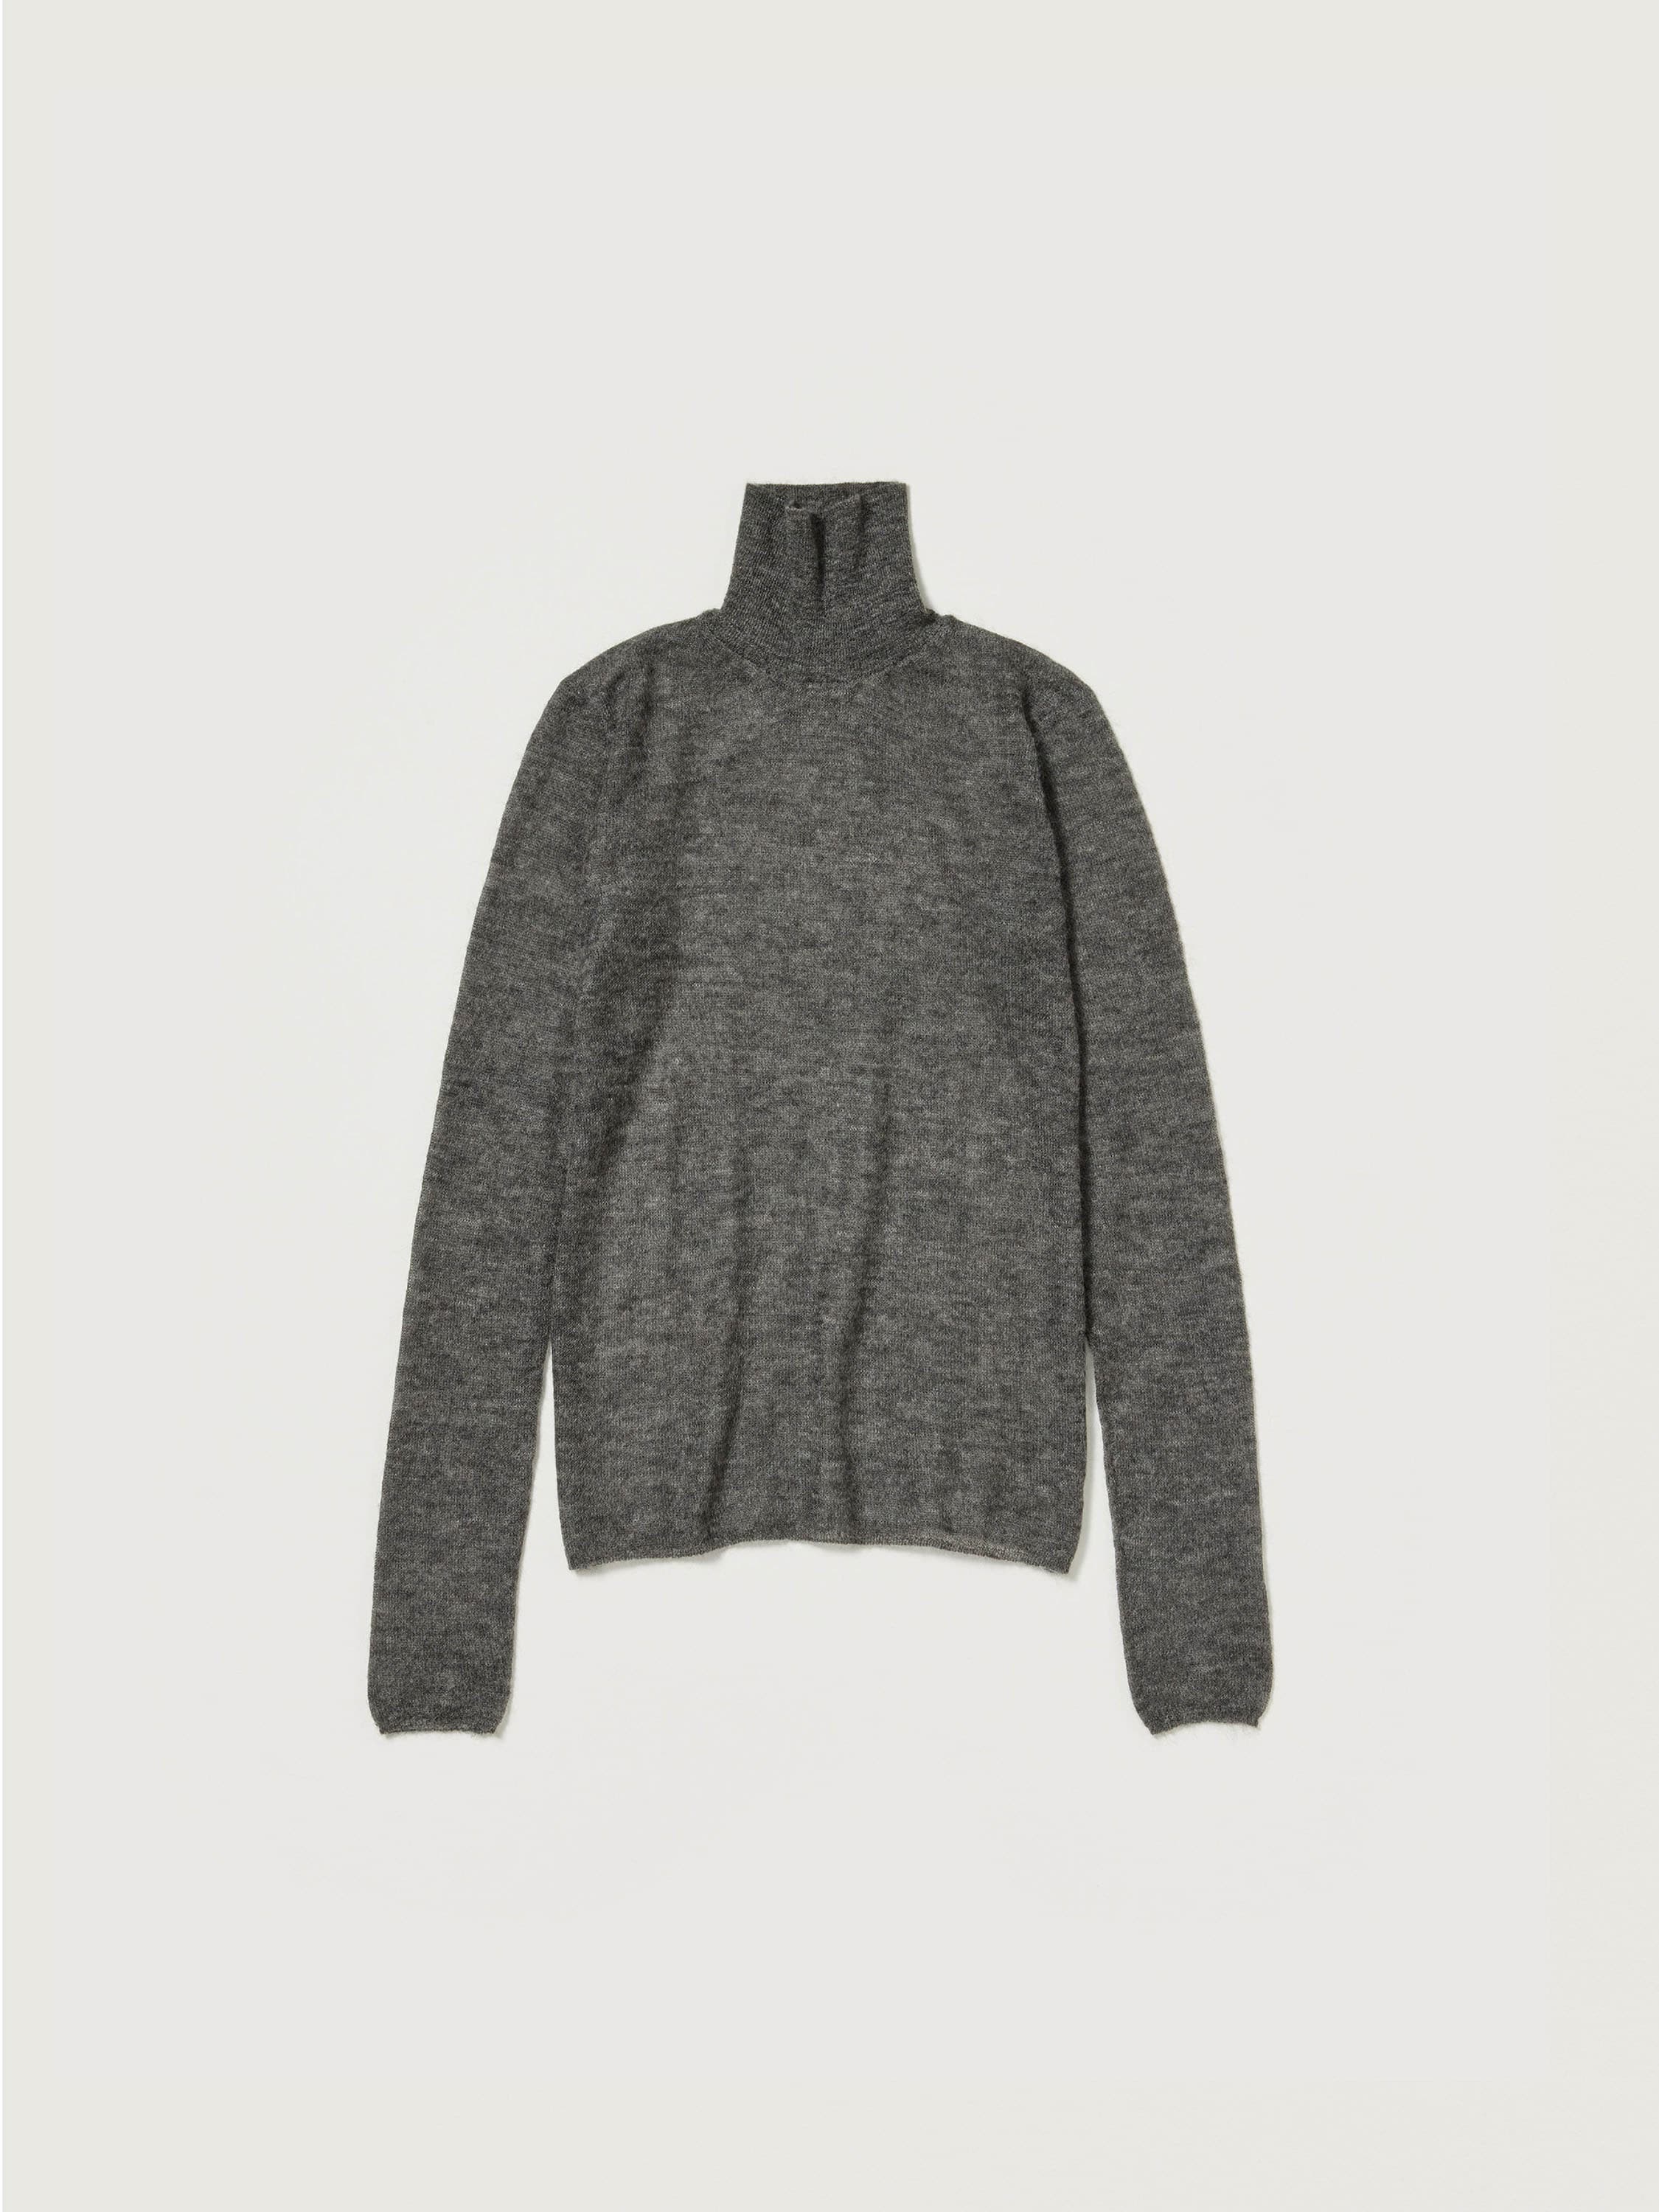 KID MOHAIR SHEER KNIT TURTLE 詳細画像 TOP CHARCOAL 1